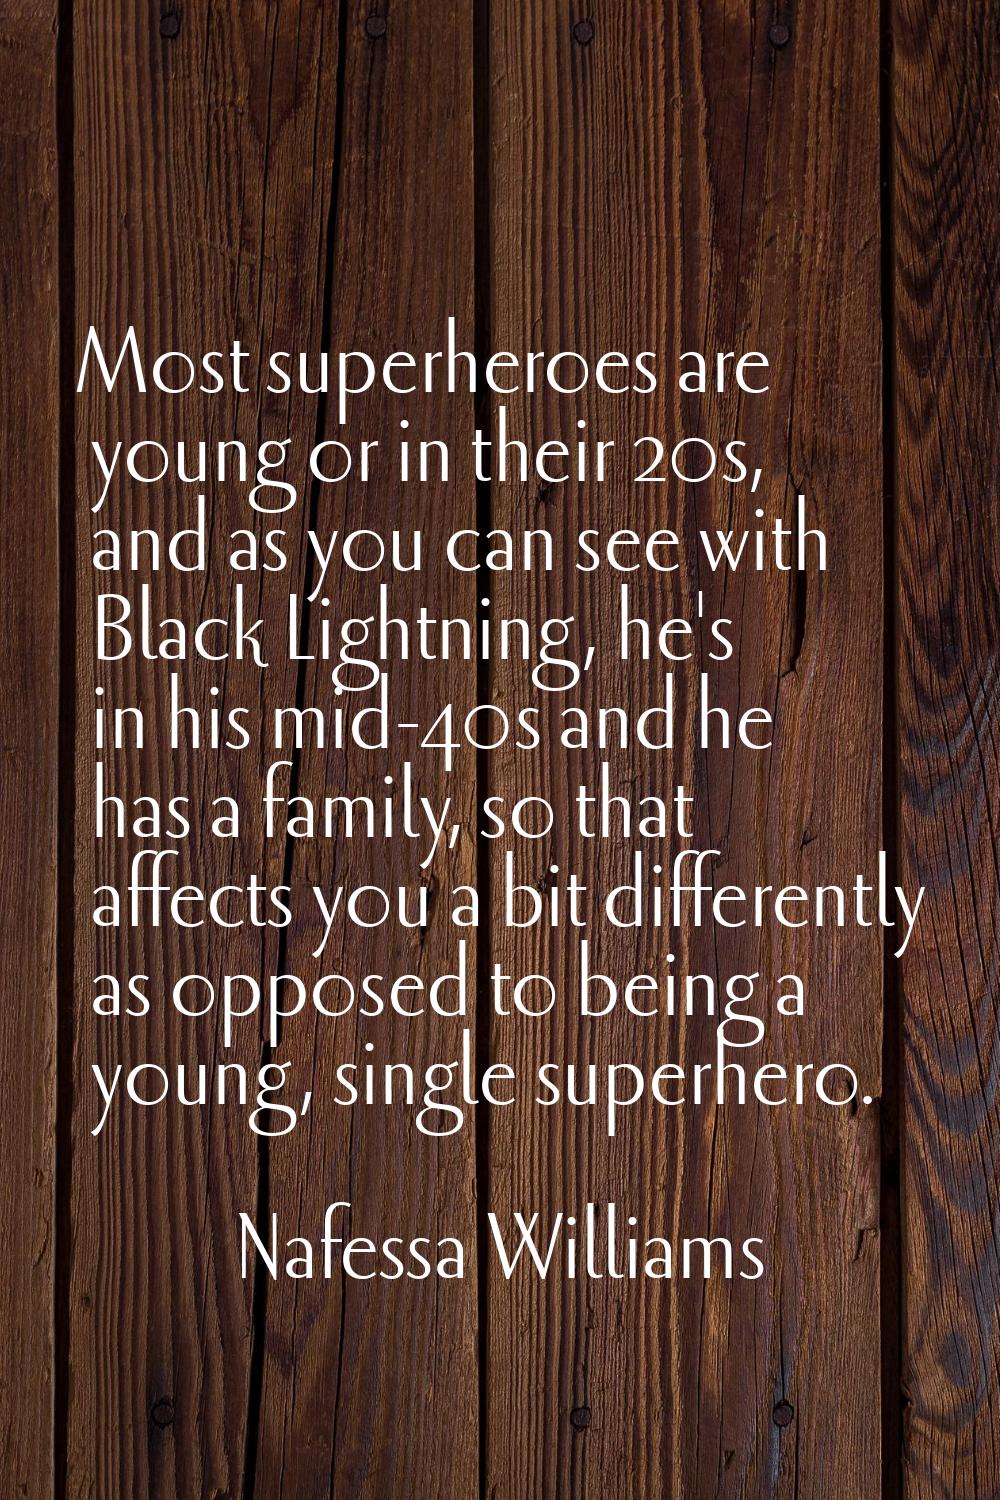 Most superheroes are young or in their 20s, and as you can see with Black Lightning, he's in his mi